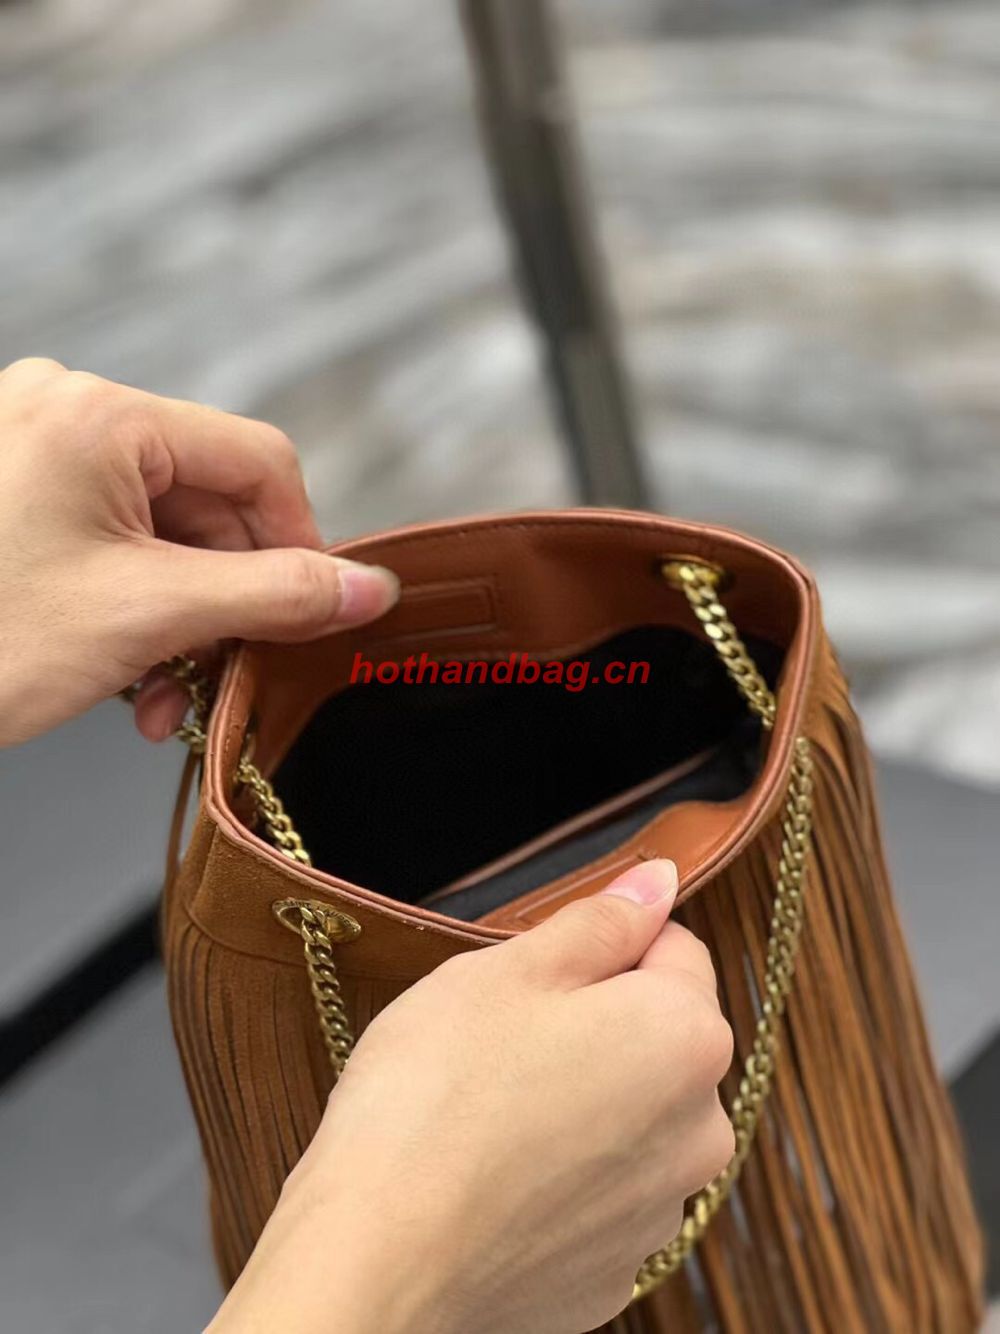 SAINT LAURENT SMALL CHAIN BAG IN LIGHT SUEDE WITH FRINGES 683378 brown